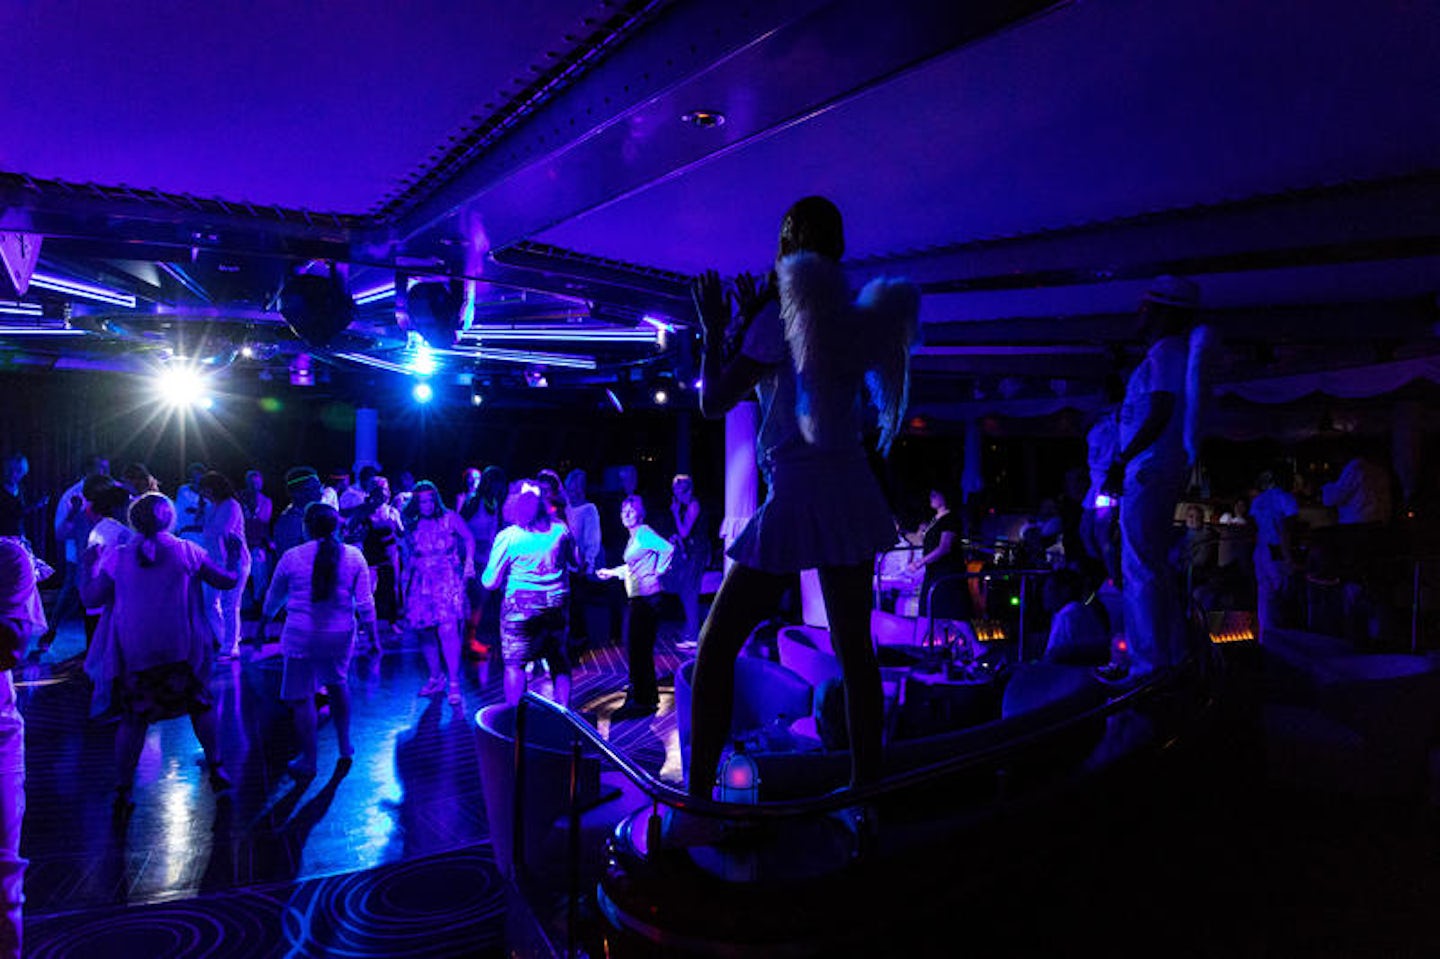 White Hot Party at Spinnaker Lounge on Norwegian Jade